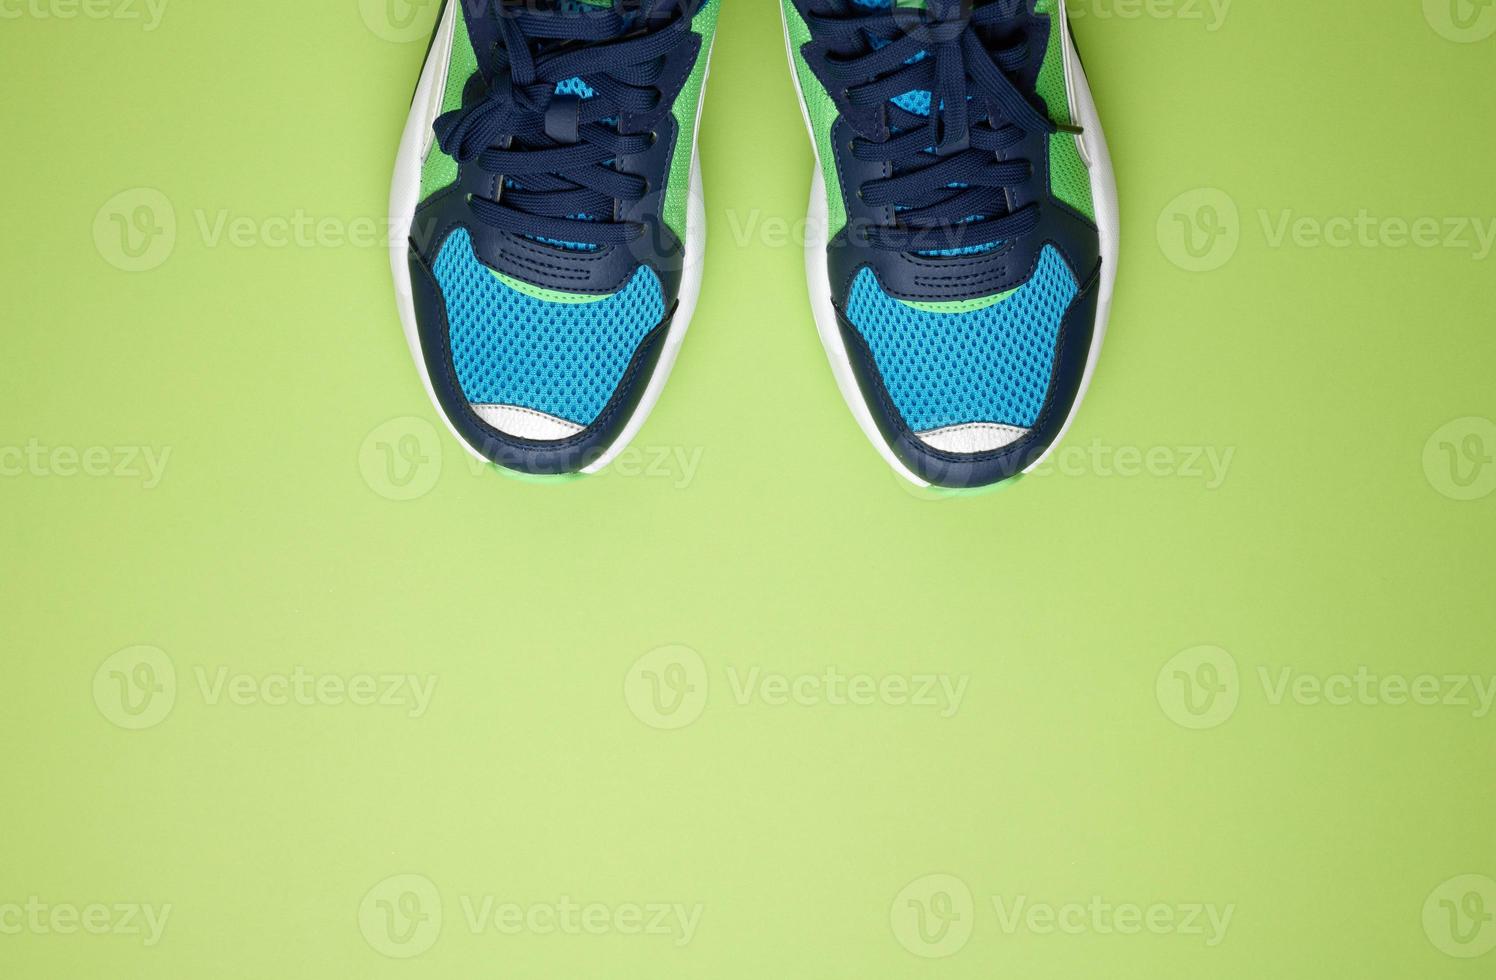 pair of blue textile sneakers on a green background, top view. Shoes for sports photo